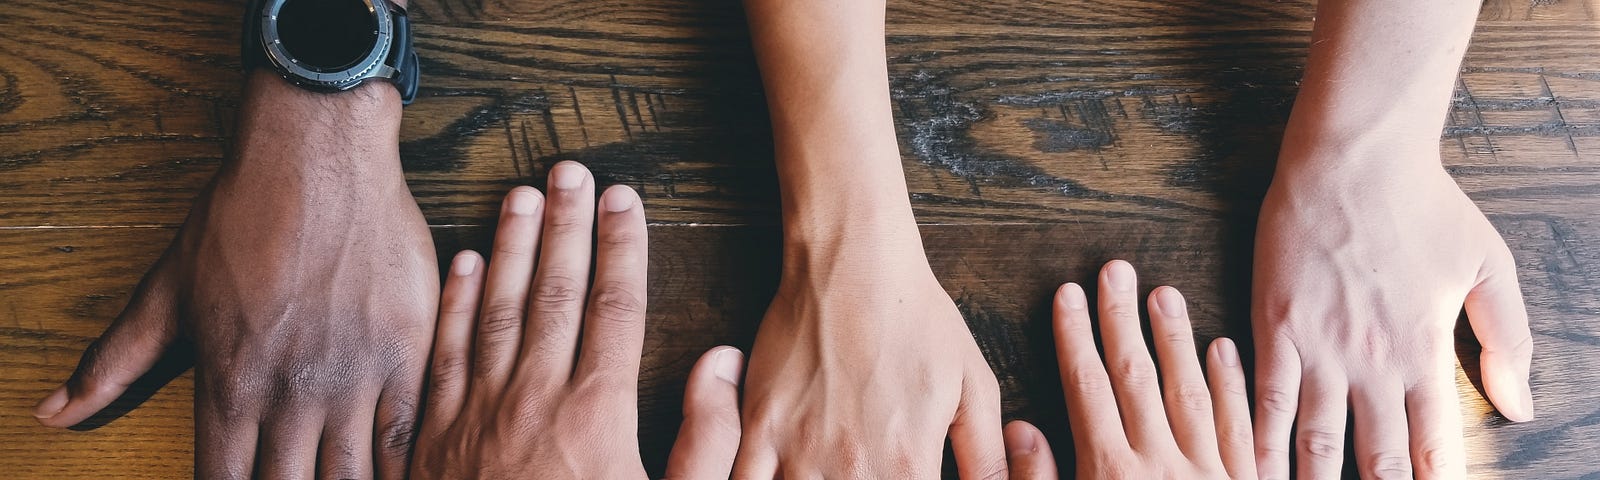 hands with different skin tones next to each other on a table